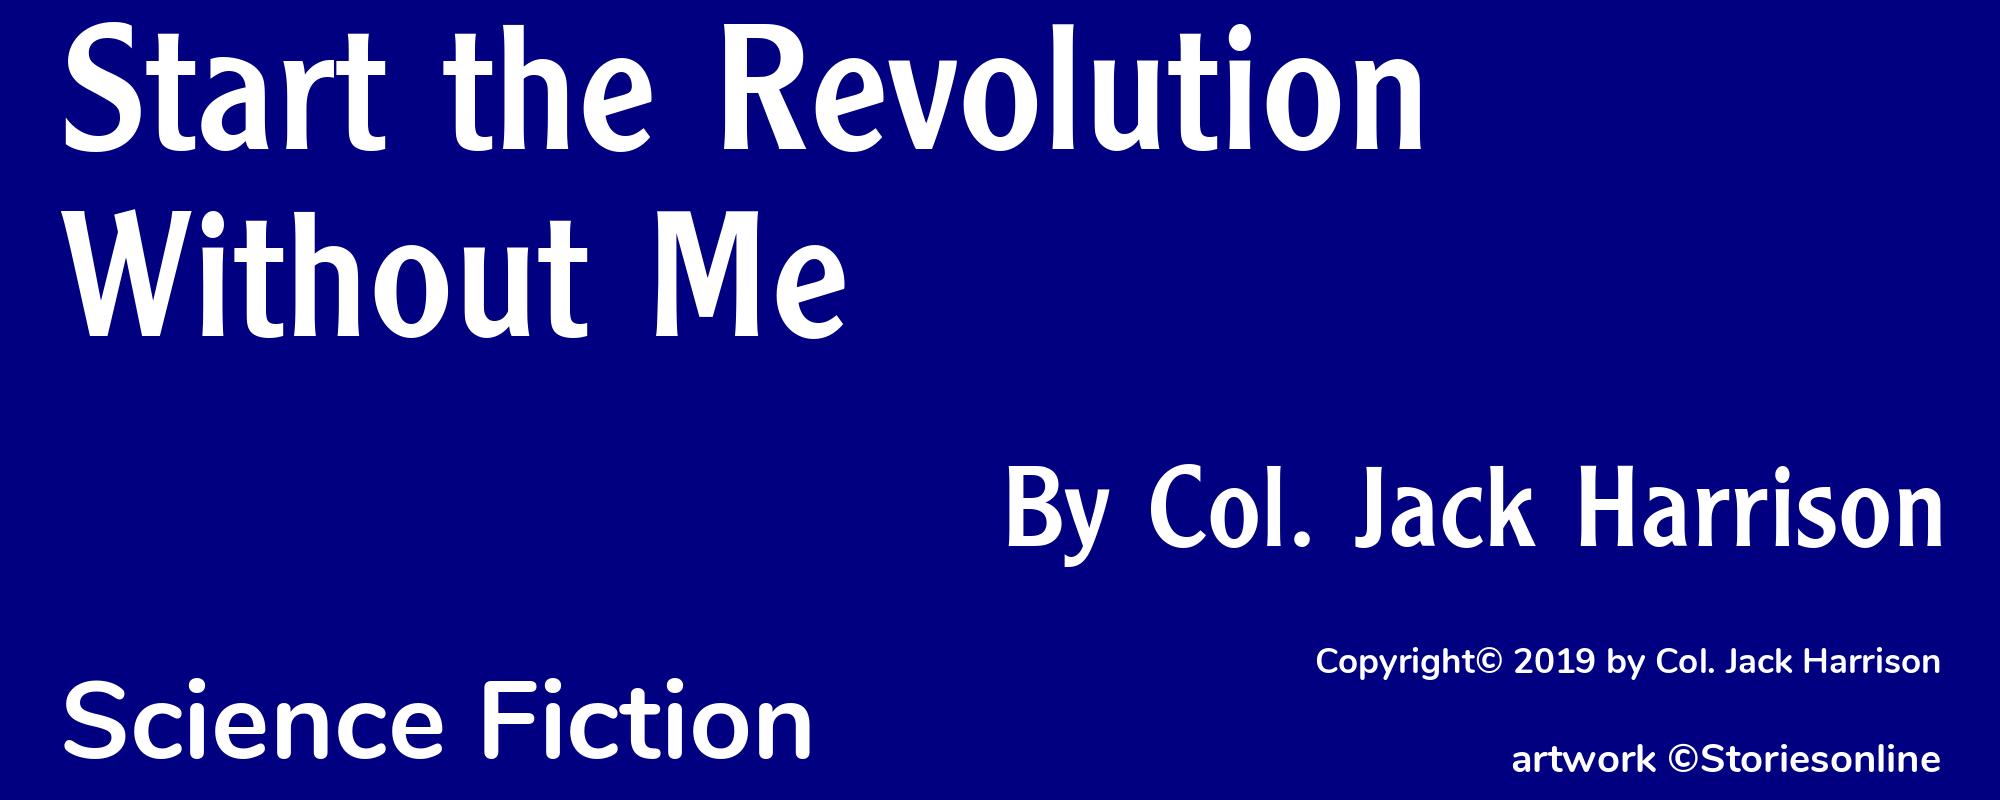 Start the Revolution Without Me - Cover